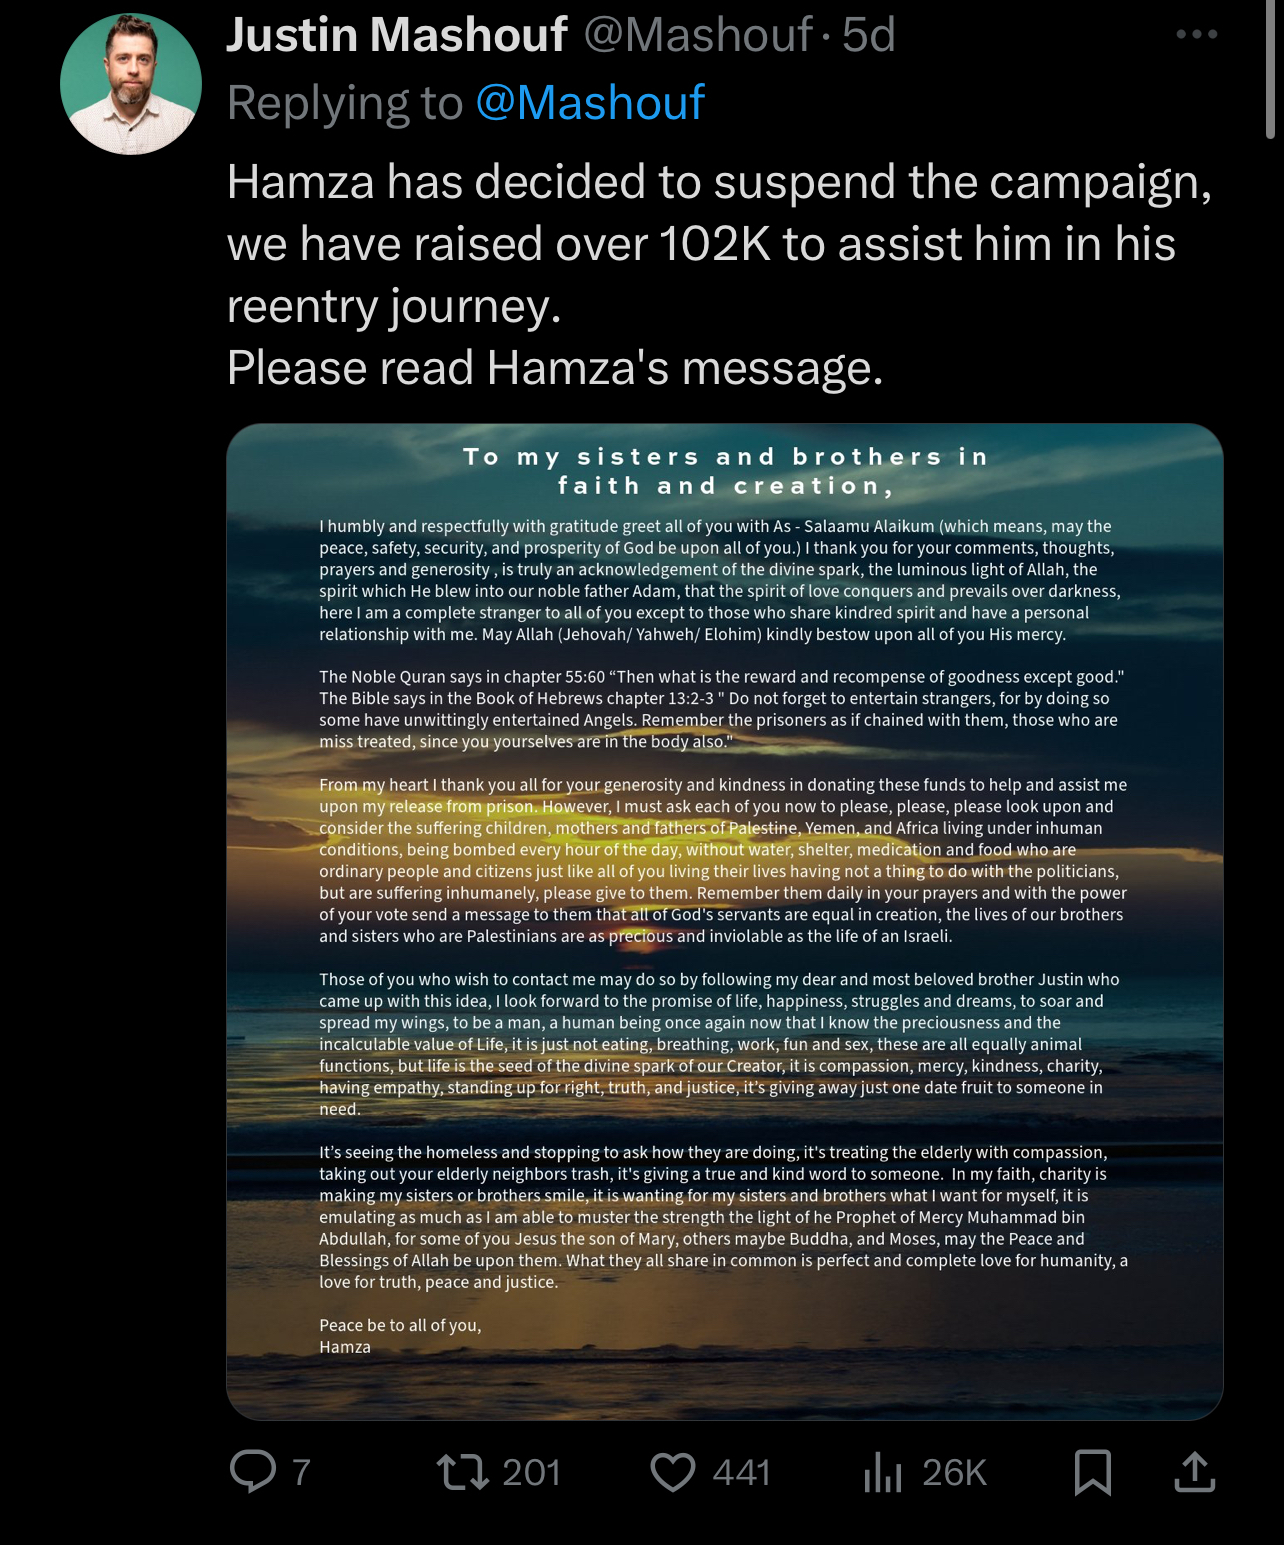 The image shows a Twitter post by Justin Mashouf responding to Hamza&#x27;s decision to suspend his campaign, including a lengthy quoted text